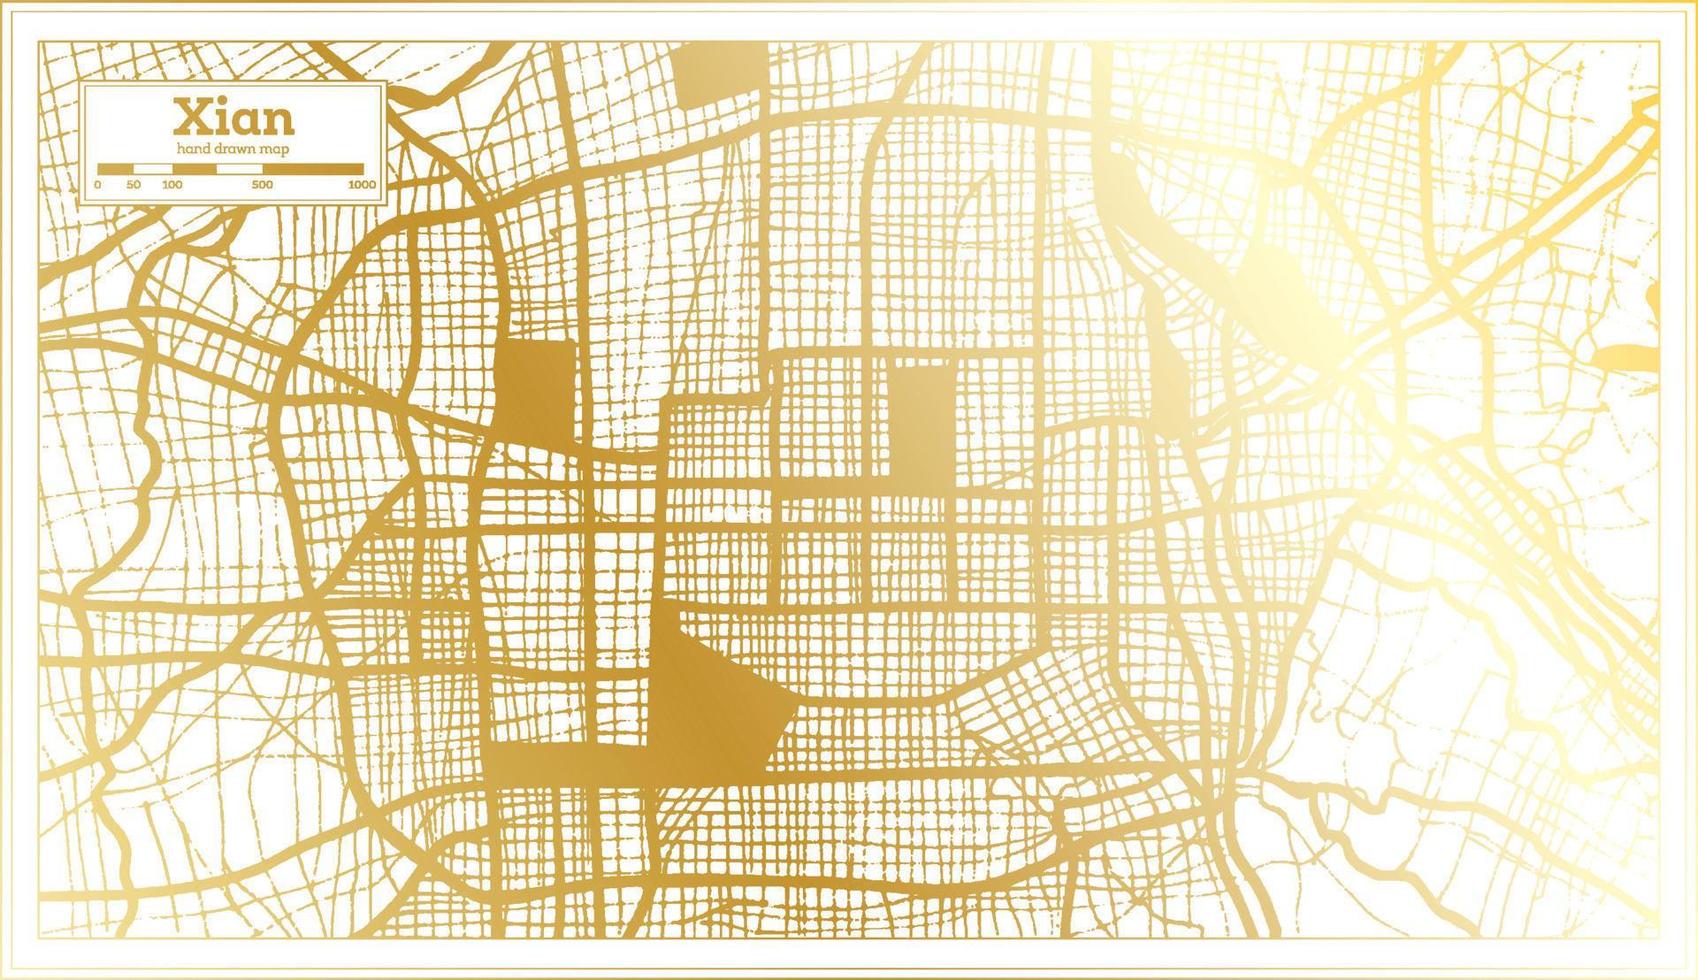 Xian China City Map in Retro Style in Golden Color. Outline Map. vector